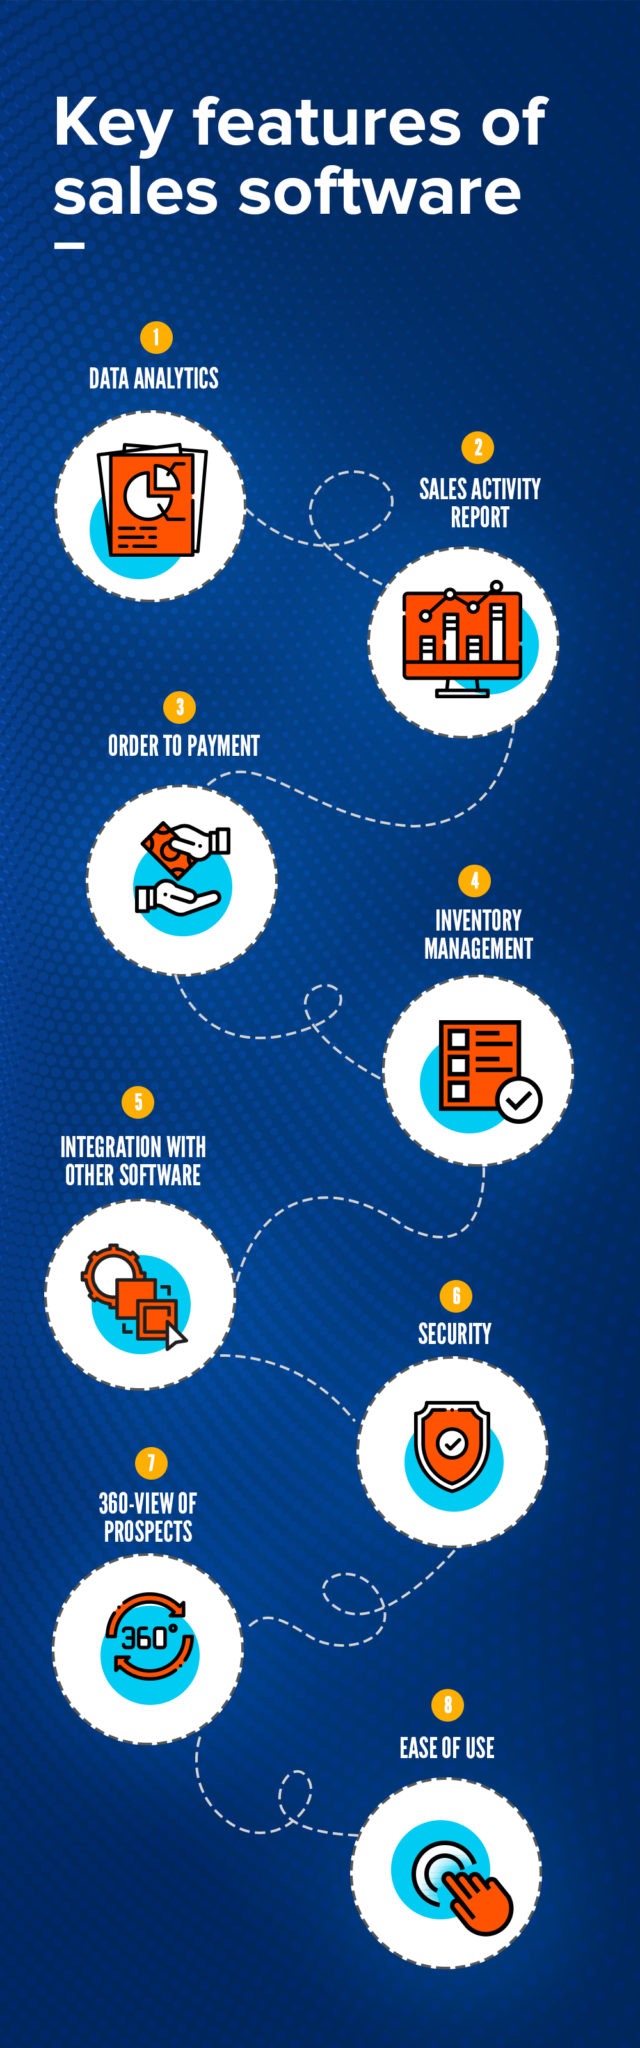 Key features of sales software - Info-graphic